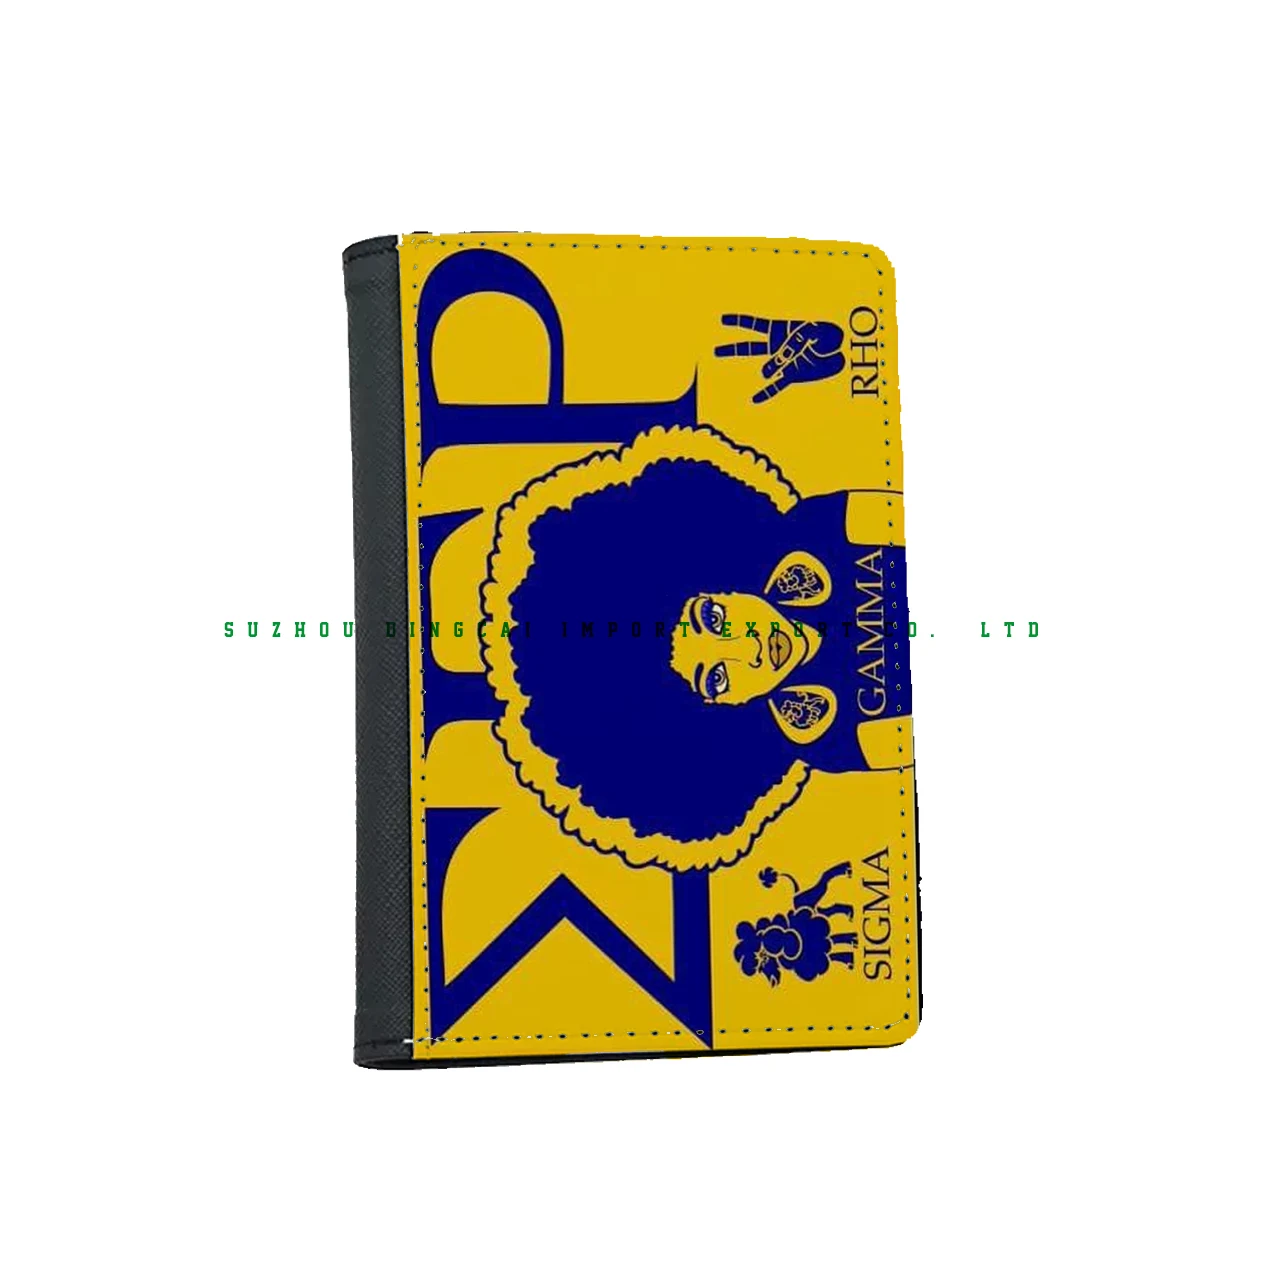 affix Plotselinge afdaling vuist Top Quality Sorority 14.6x9cm Passport Cover Pu Leather Sigma Gamma Rho  Passport Holder Cover Case With Card Slot - Buy Sigma Gamma Rho Passport  Holder,Sigma Gamma Rho Passport Cover,Sublimation Cover Case Product